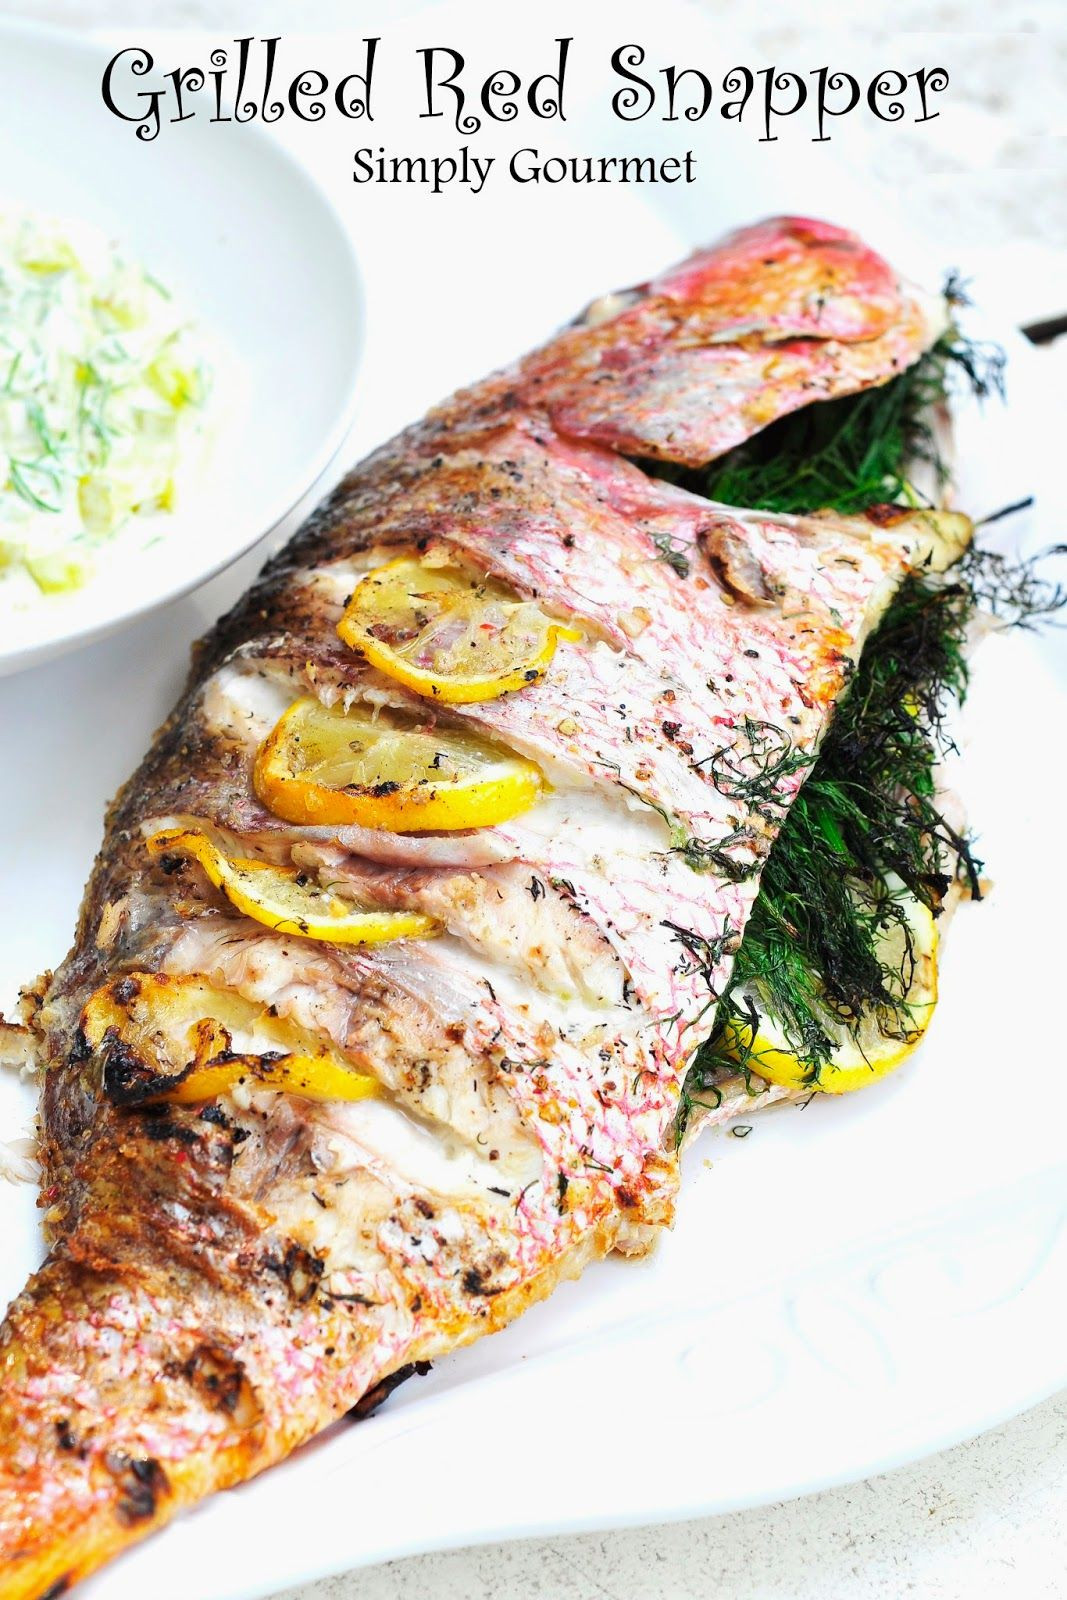 Snapper Fish Recipes
 Grilled Red Snapper